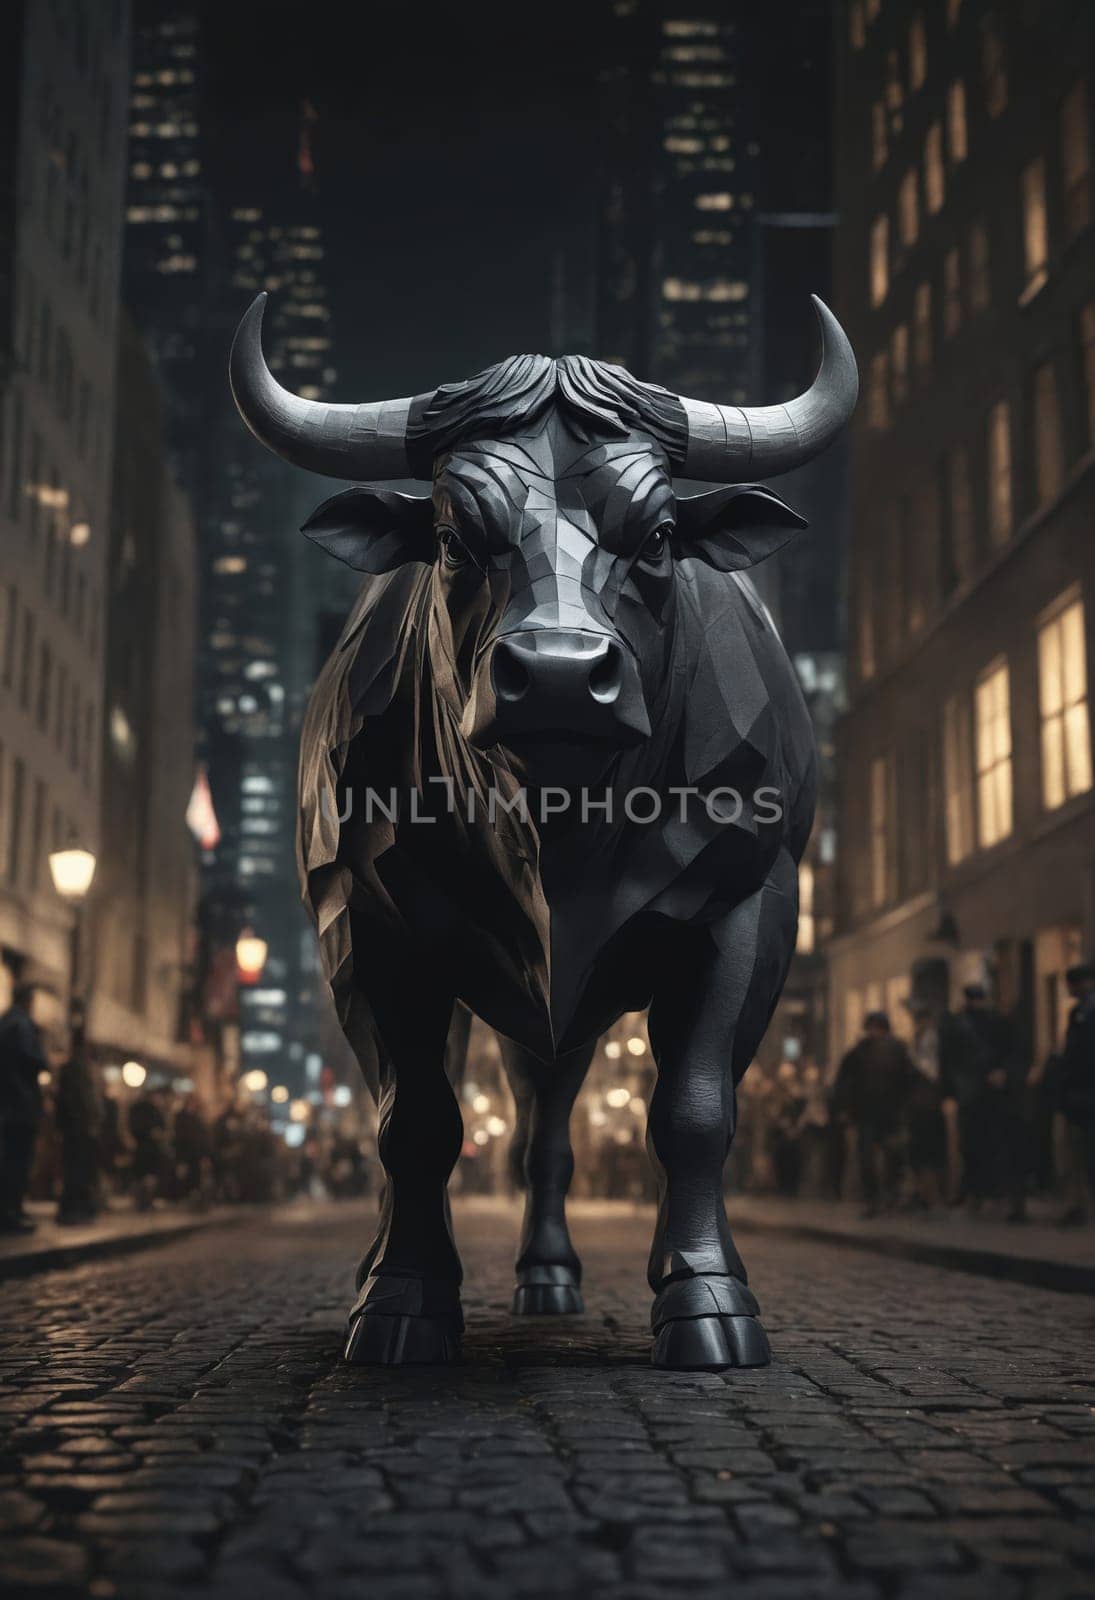 A metal statue of a bull stands on a city street at night, contrasting with the darkness. The symmetrical building in the background reflects in the water nearby